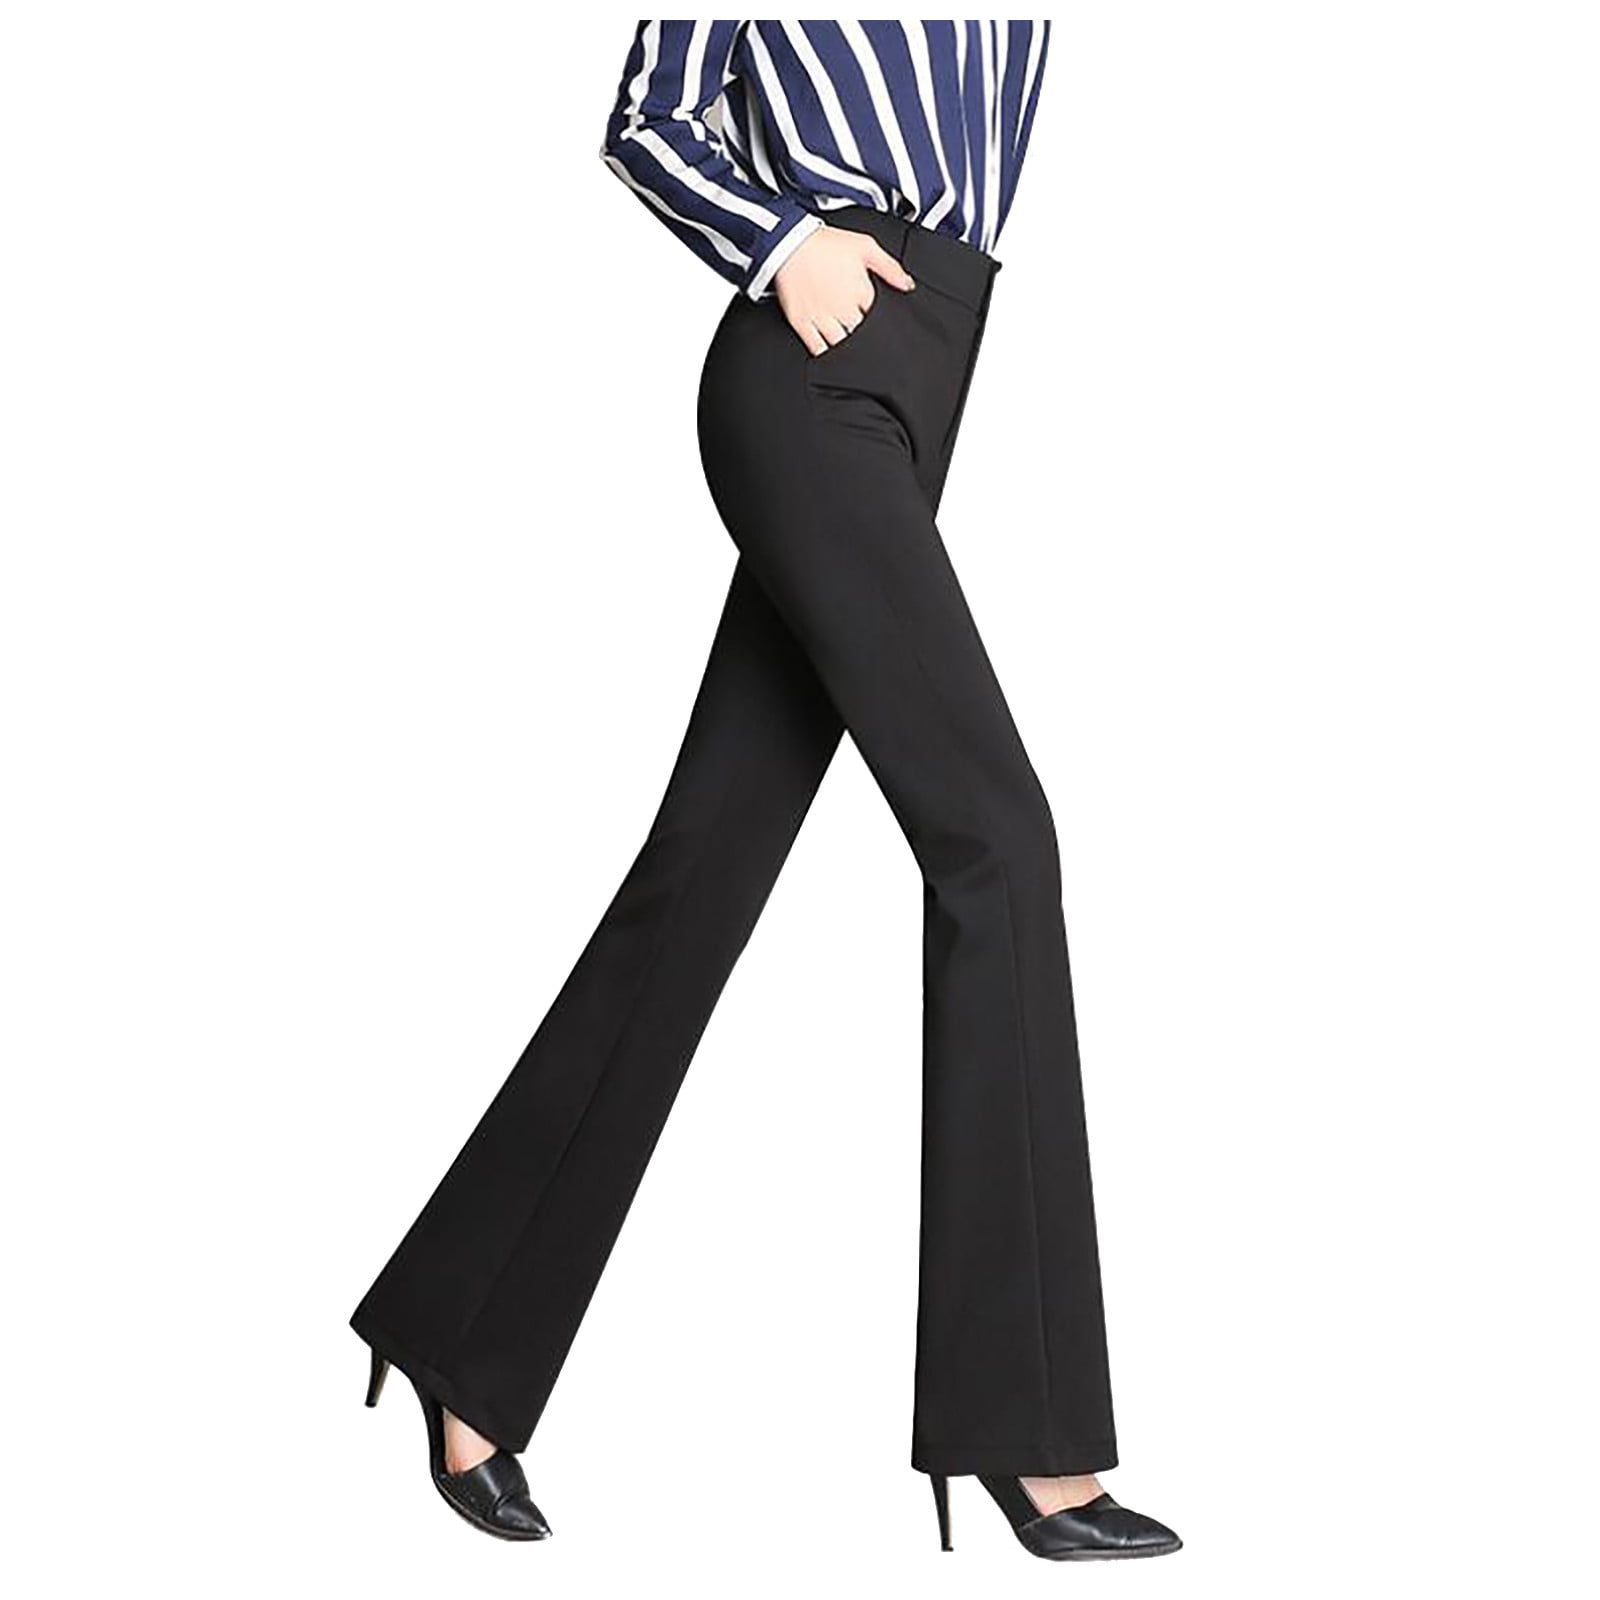 2DXuixsh Casual Dress Pants for Women Tall Trousers Solid Flared Pockets  Women Pants Pants Long Waist Straight-Leg High Pants Stretchy Pants for  Women